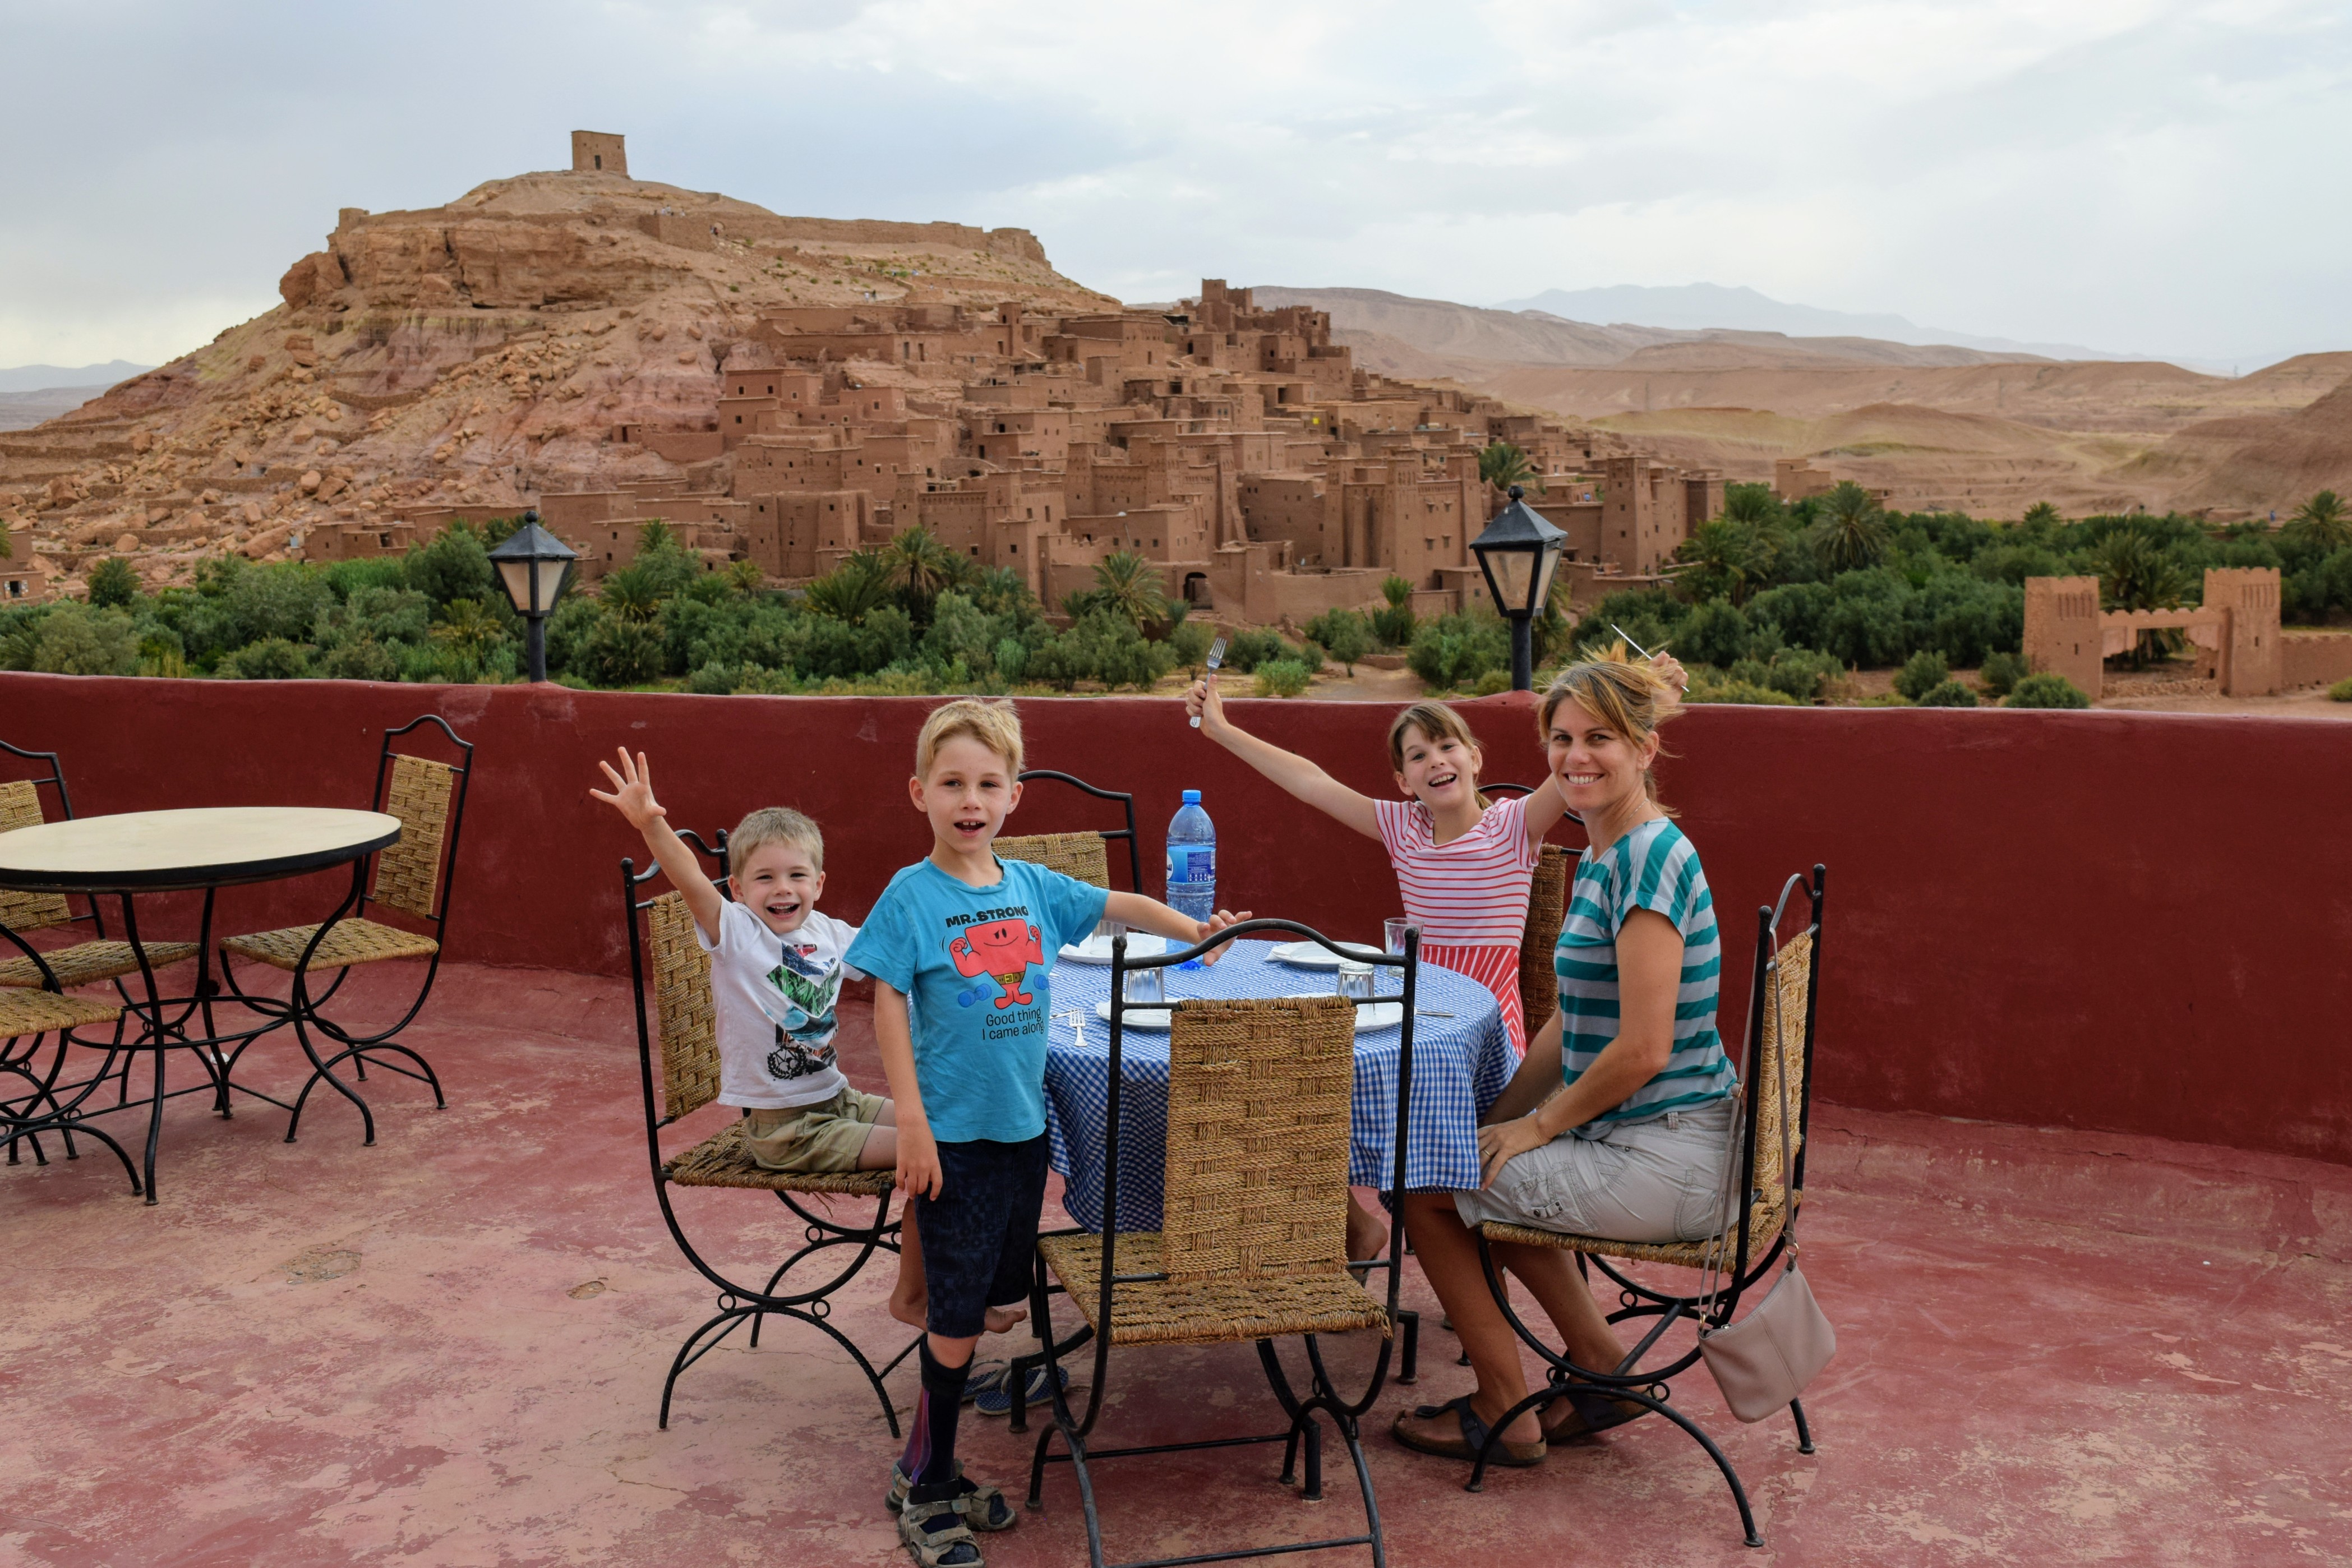 Enjoying one of our last meals in Morocco